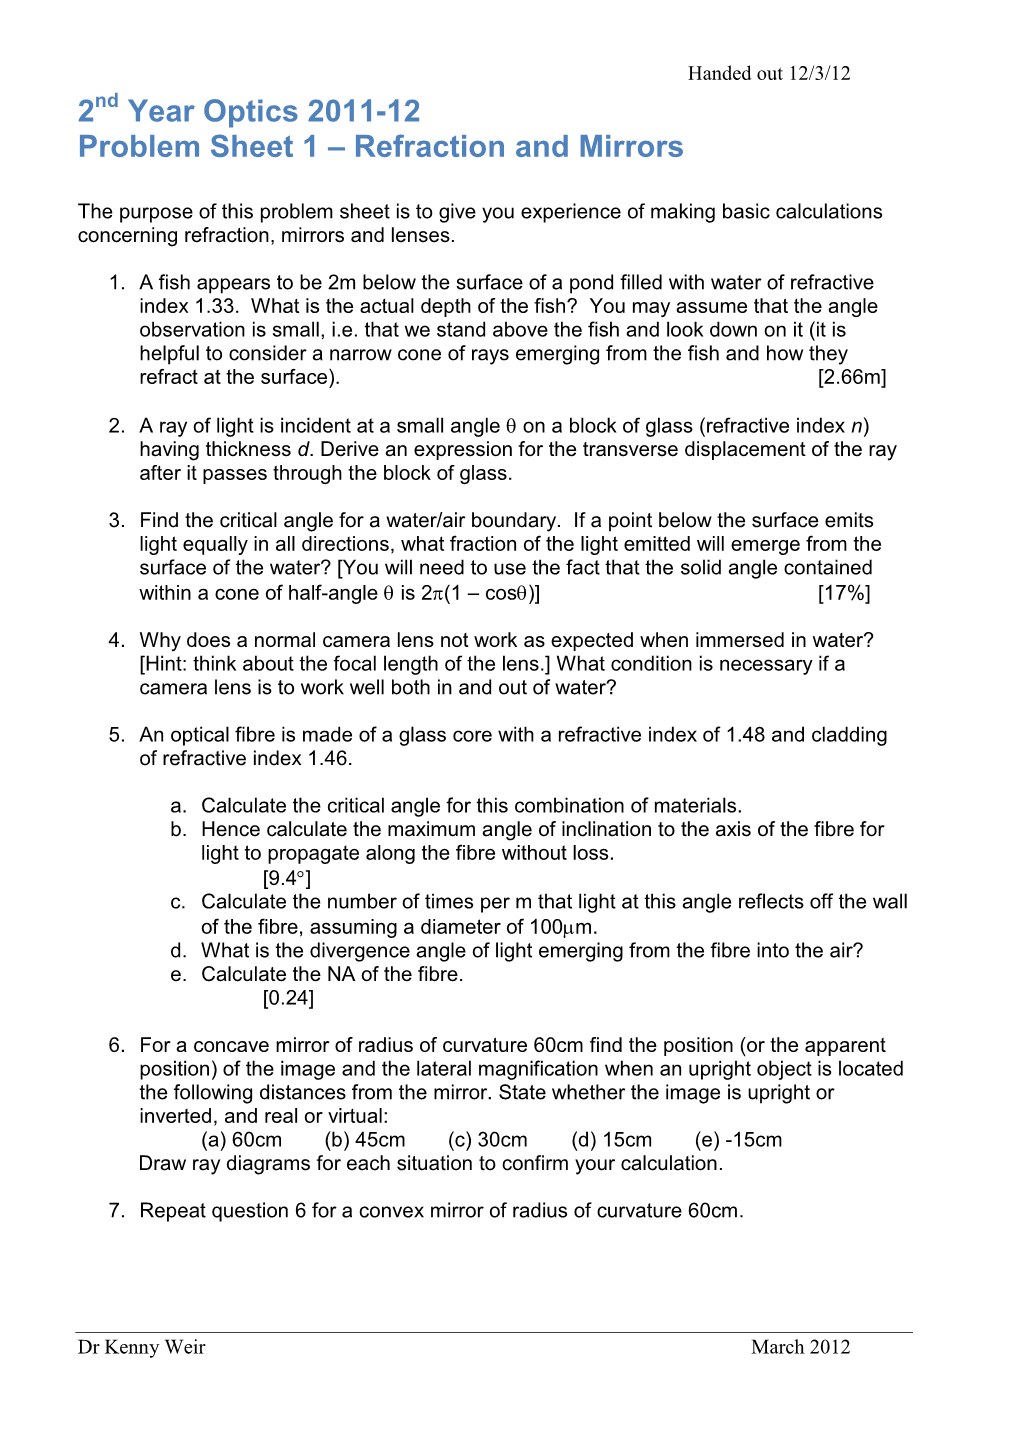 2Nd Year Optics 2011-12 Problem Sheet 1 – Refraction and Mirrors